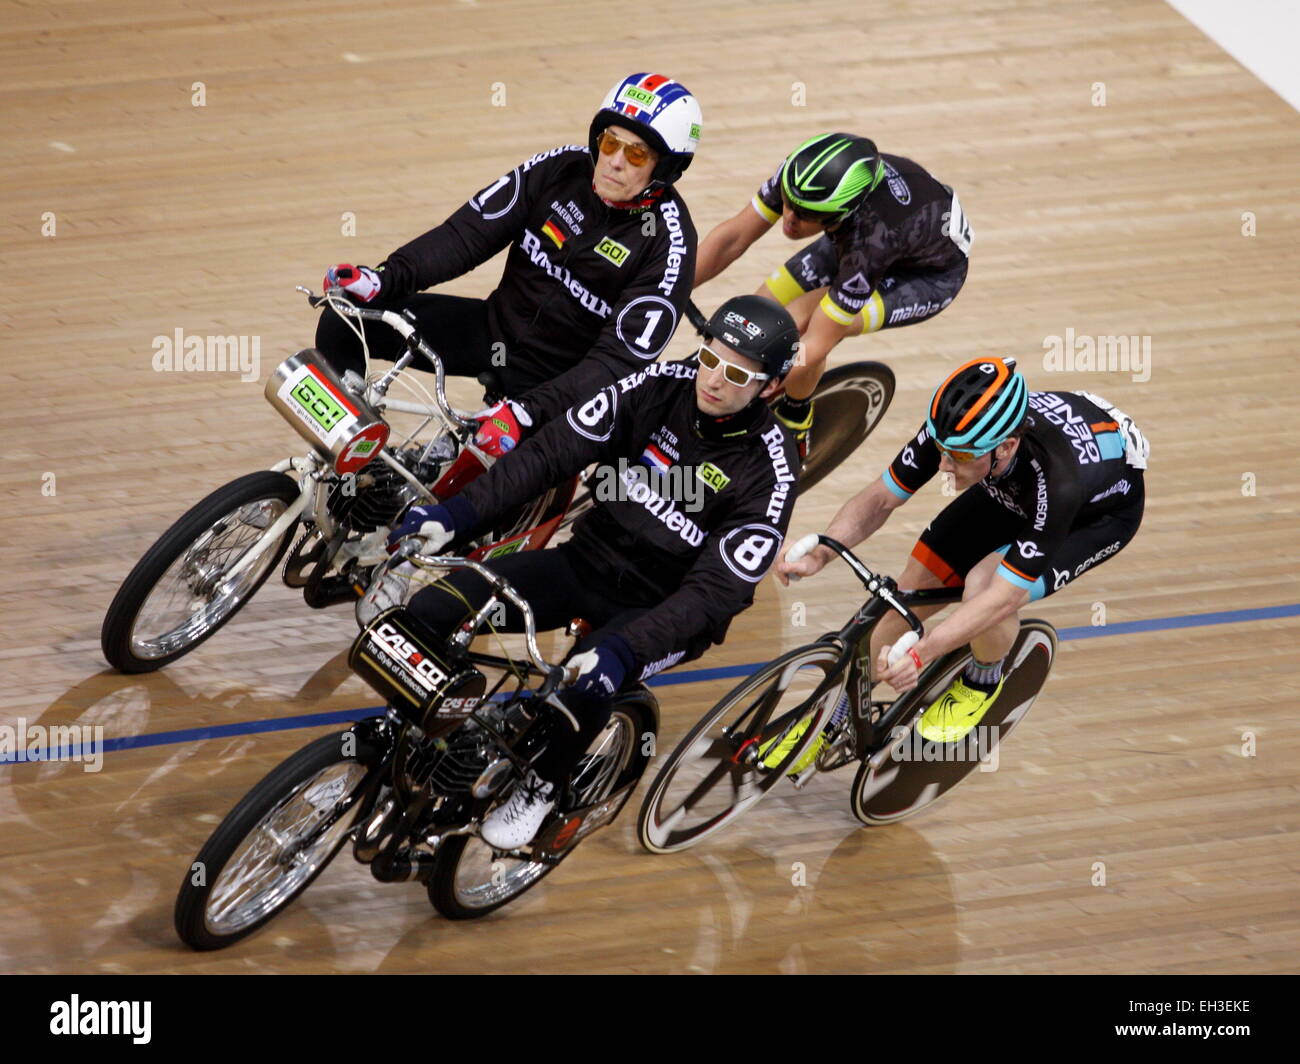 Lee Valley VeloPark, London, UK. 28th February 2015. Riders bunch up in the Revolution Derny Race Stock Photo